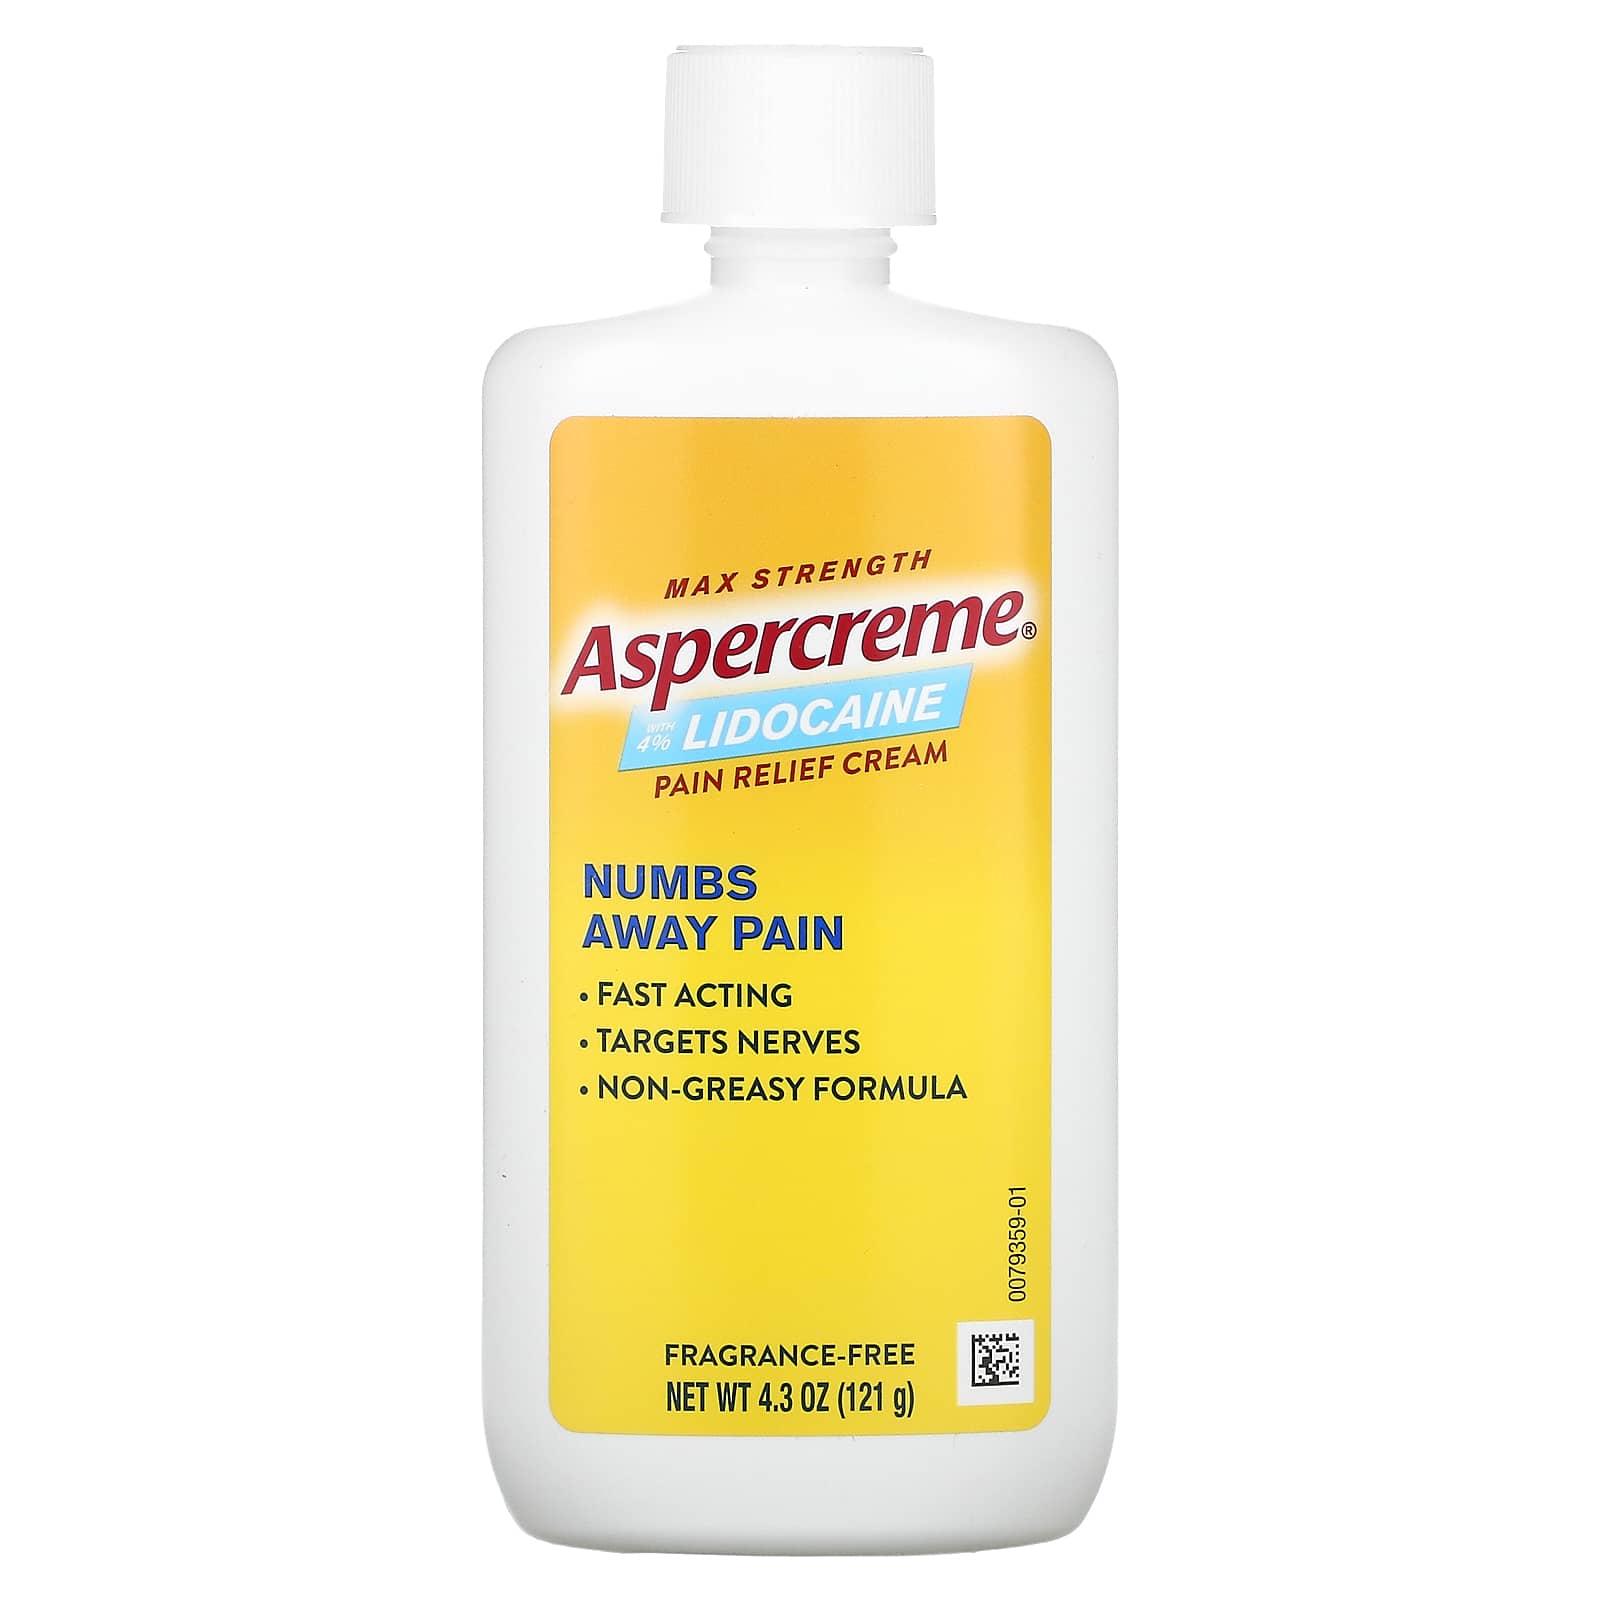 Buy Aspercreme with Lidocaine Maximum Strength Pain Relief Cream 43 Oz  Online at Lowest Price in Ubuy India B08WHLTGZN